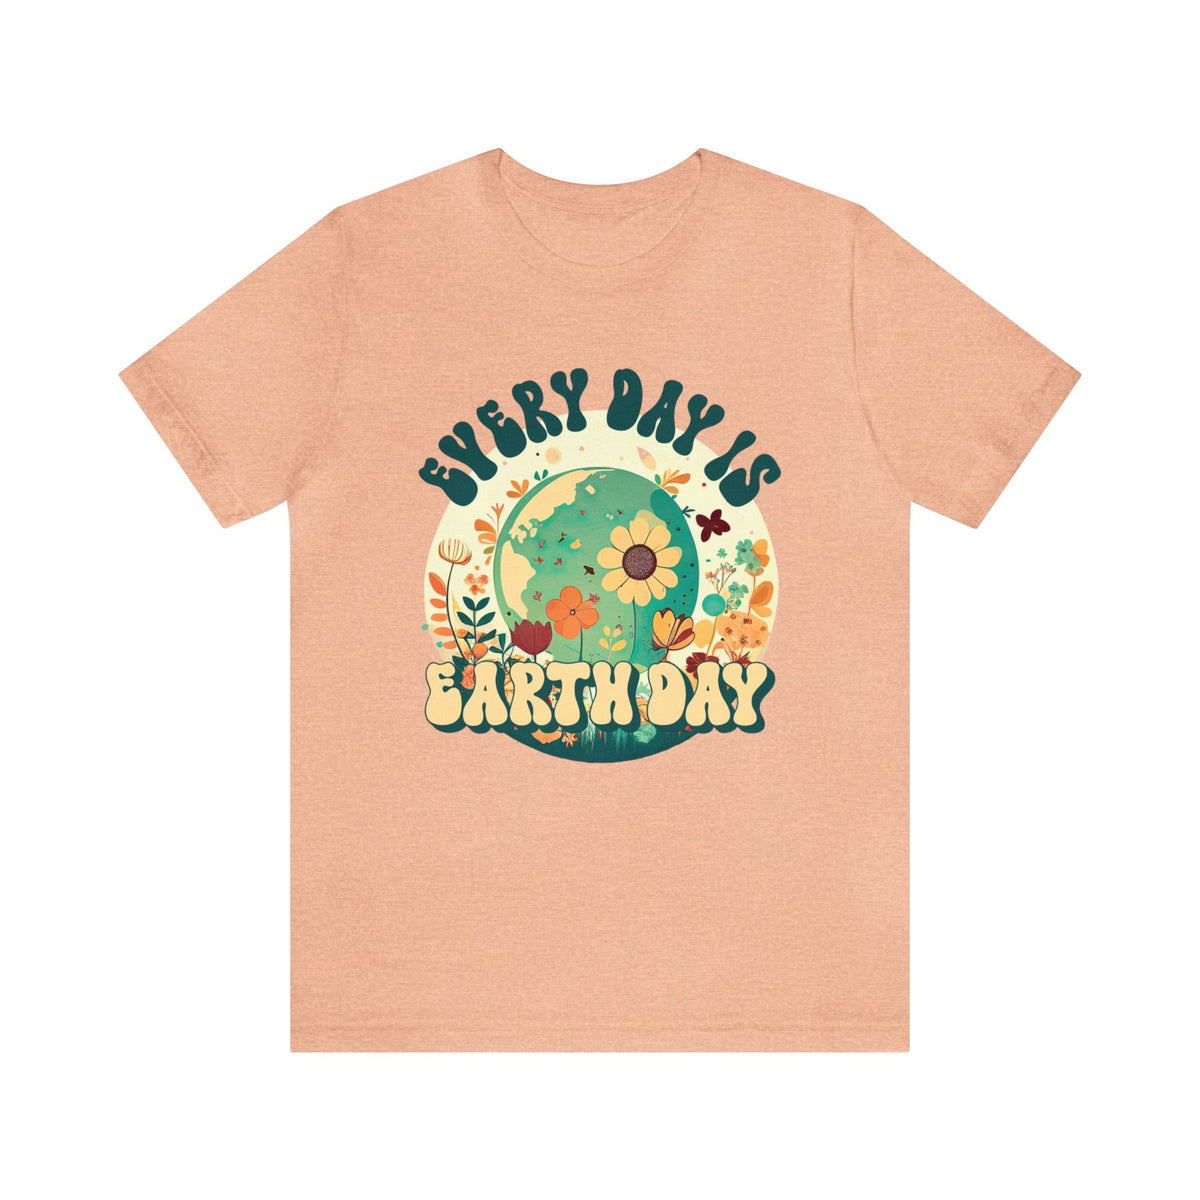 Every Day Is Earth Day Shirt | Mother Earth Flower shirt | Nature Shirt | Gift For Her | Super Soft Shirt | Unisex Jersey T-shirt